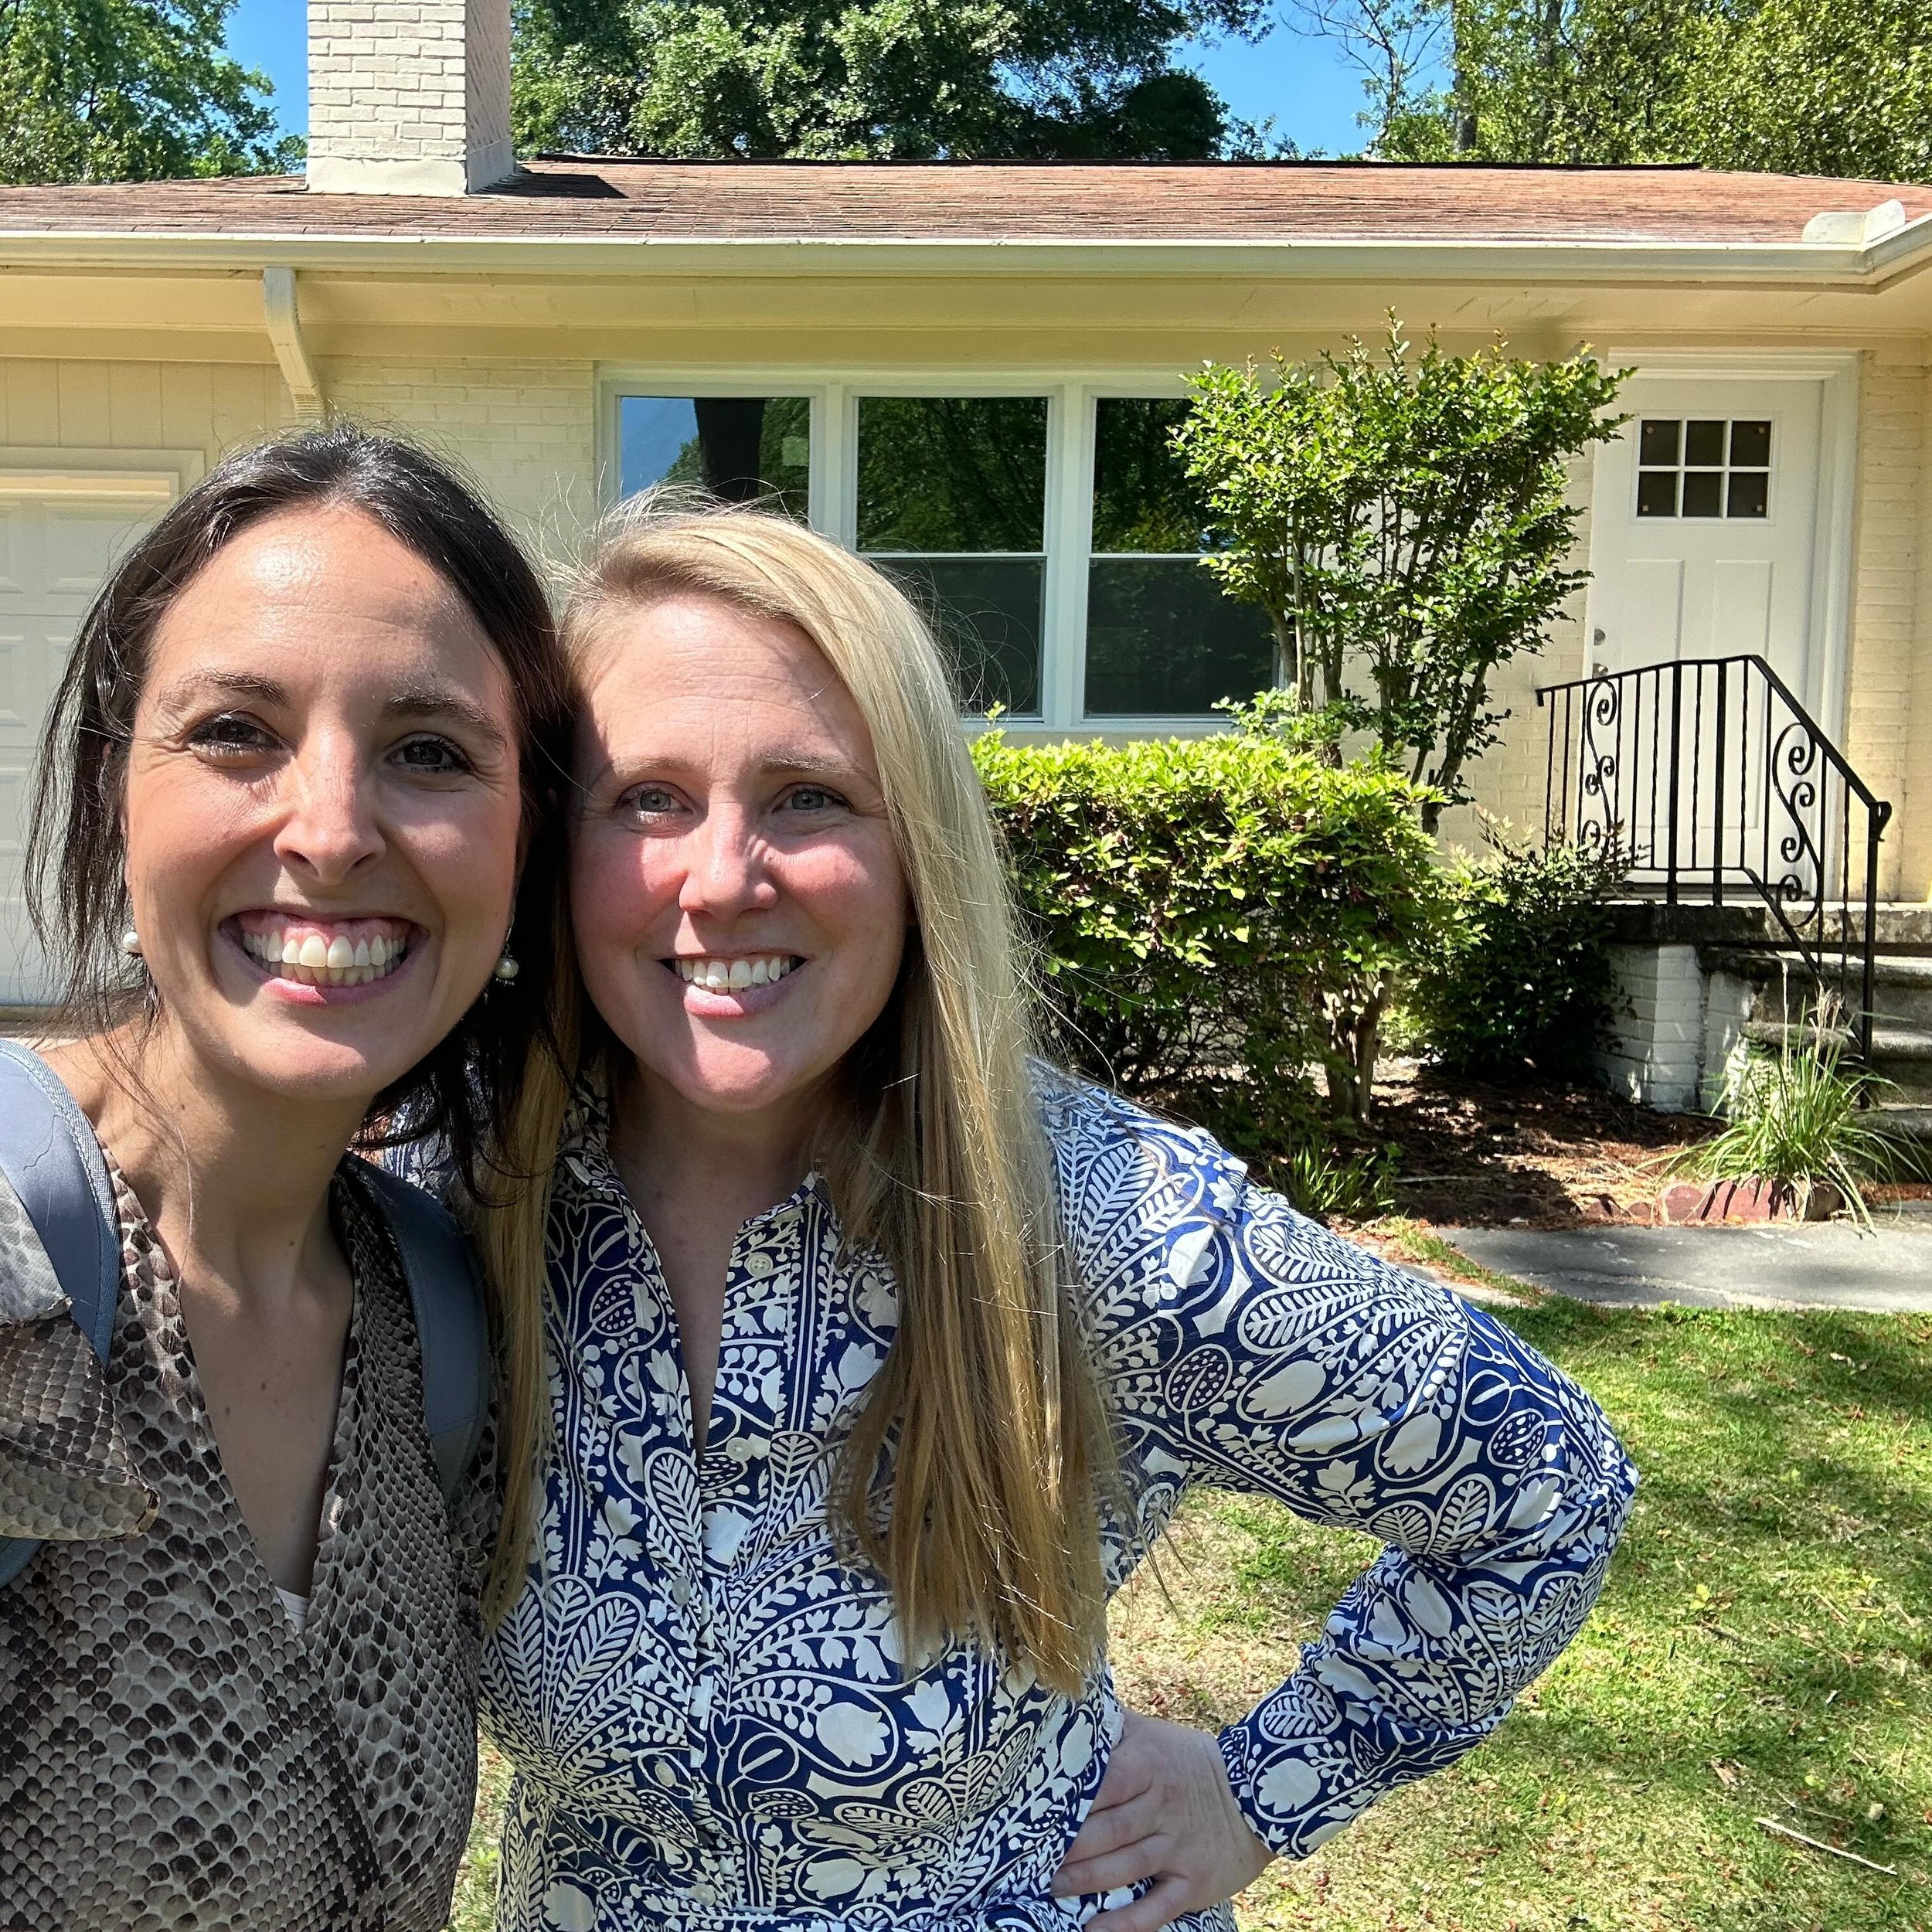 Big milestone for my client who purchased this home in prime #peachtreehills !!! This renovated ranch home is the perfect size and fit for her! Plus, she gets a dreamy backyard! So thrilled for her!